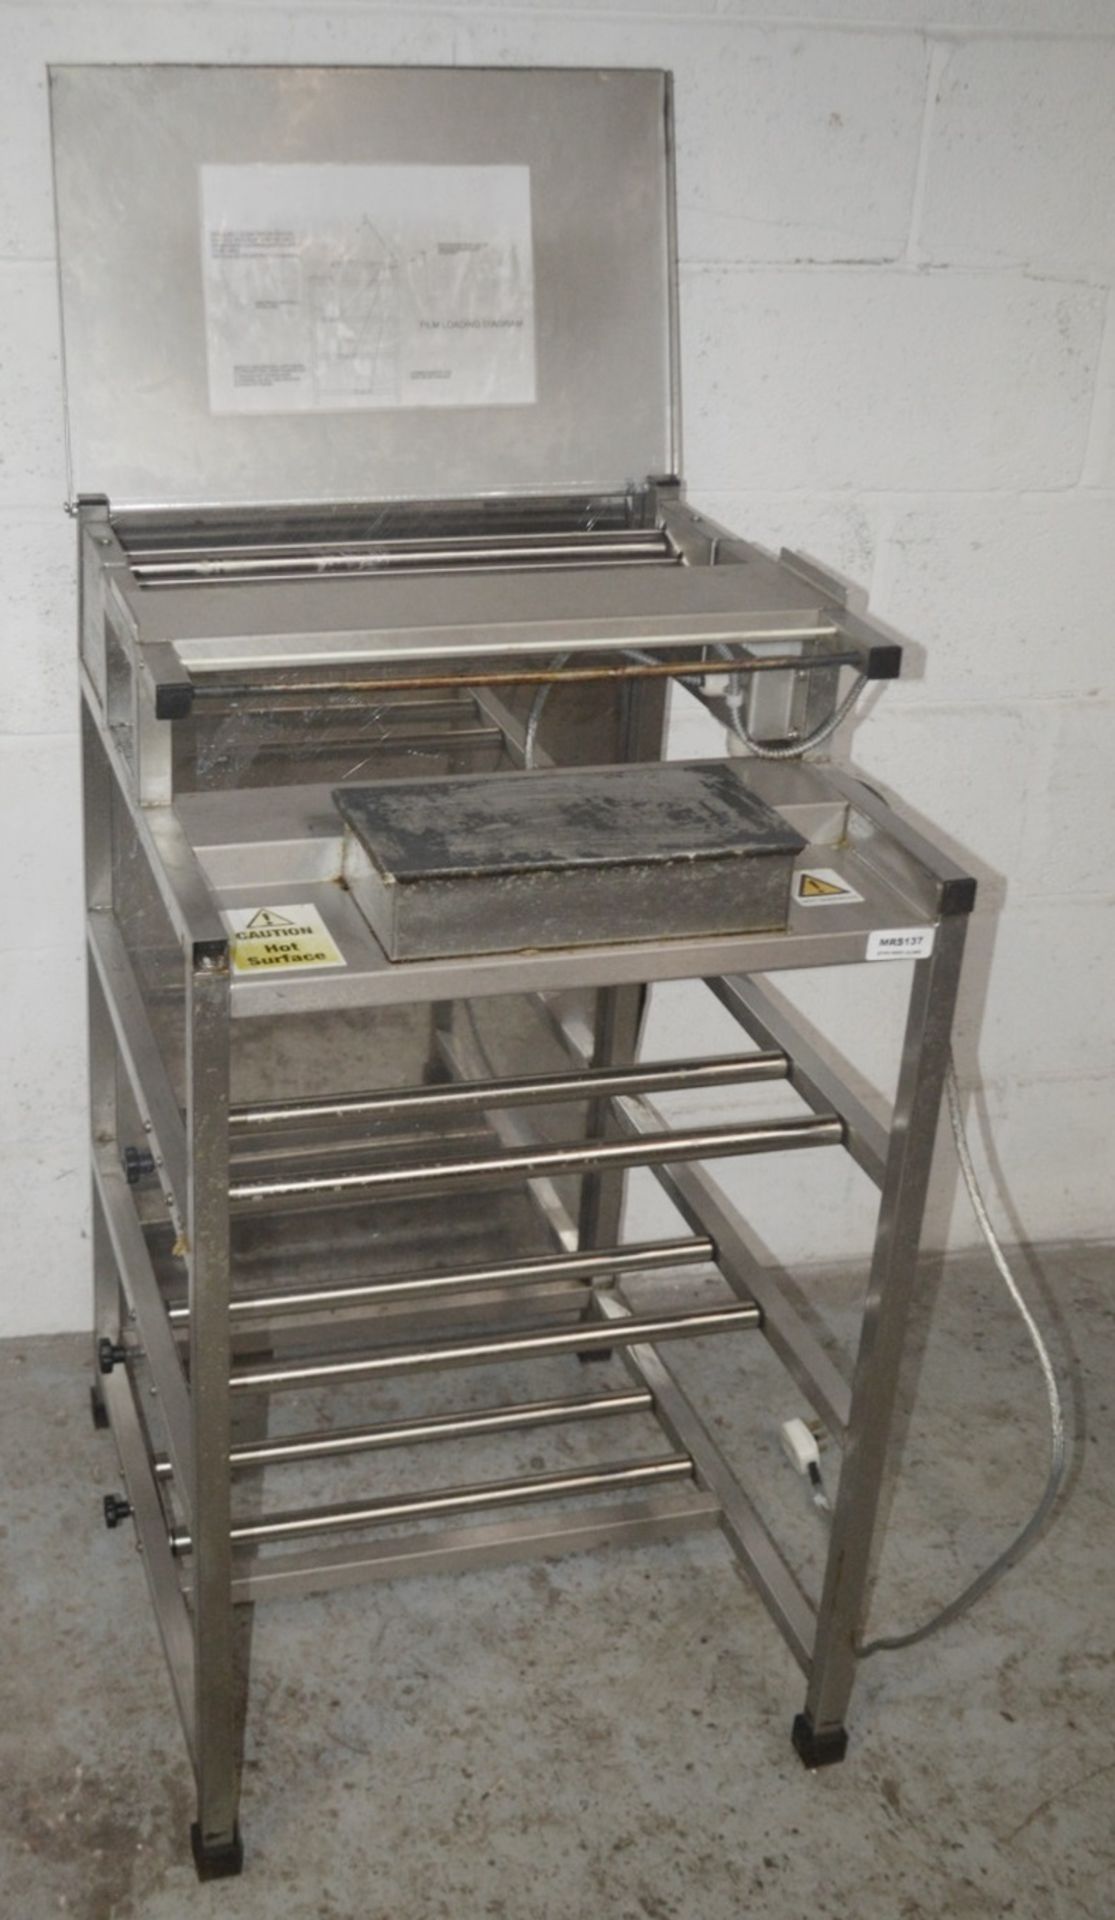 1 x Stainless Steel Commercial Kitchen Sealer Bench With Modesty Panel - Dimensions: H98 x W56 x - Image 3 of 6